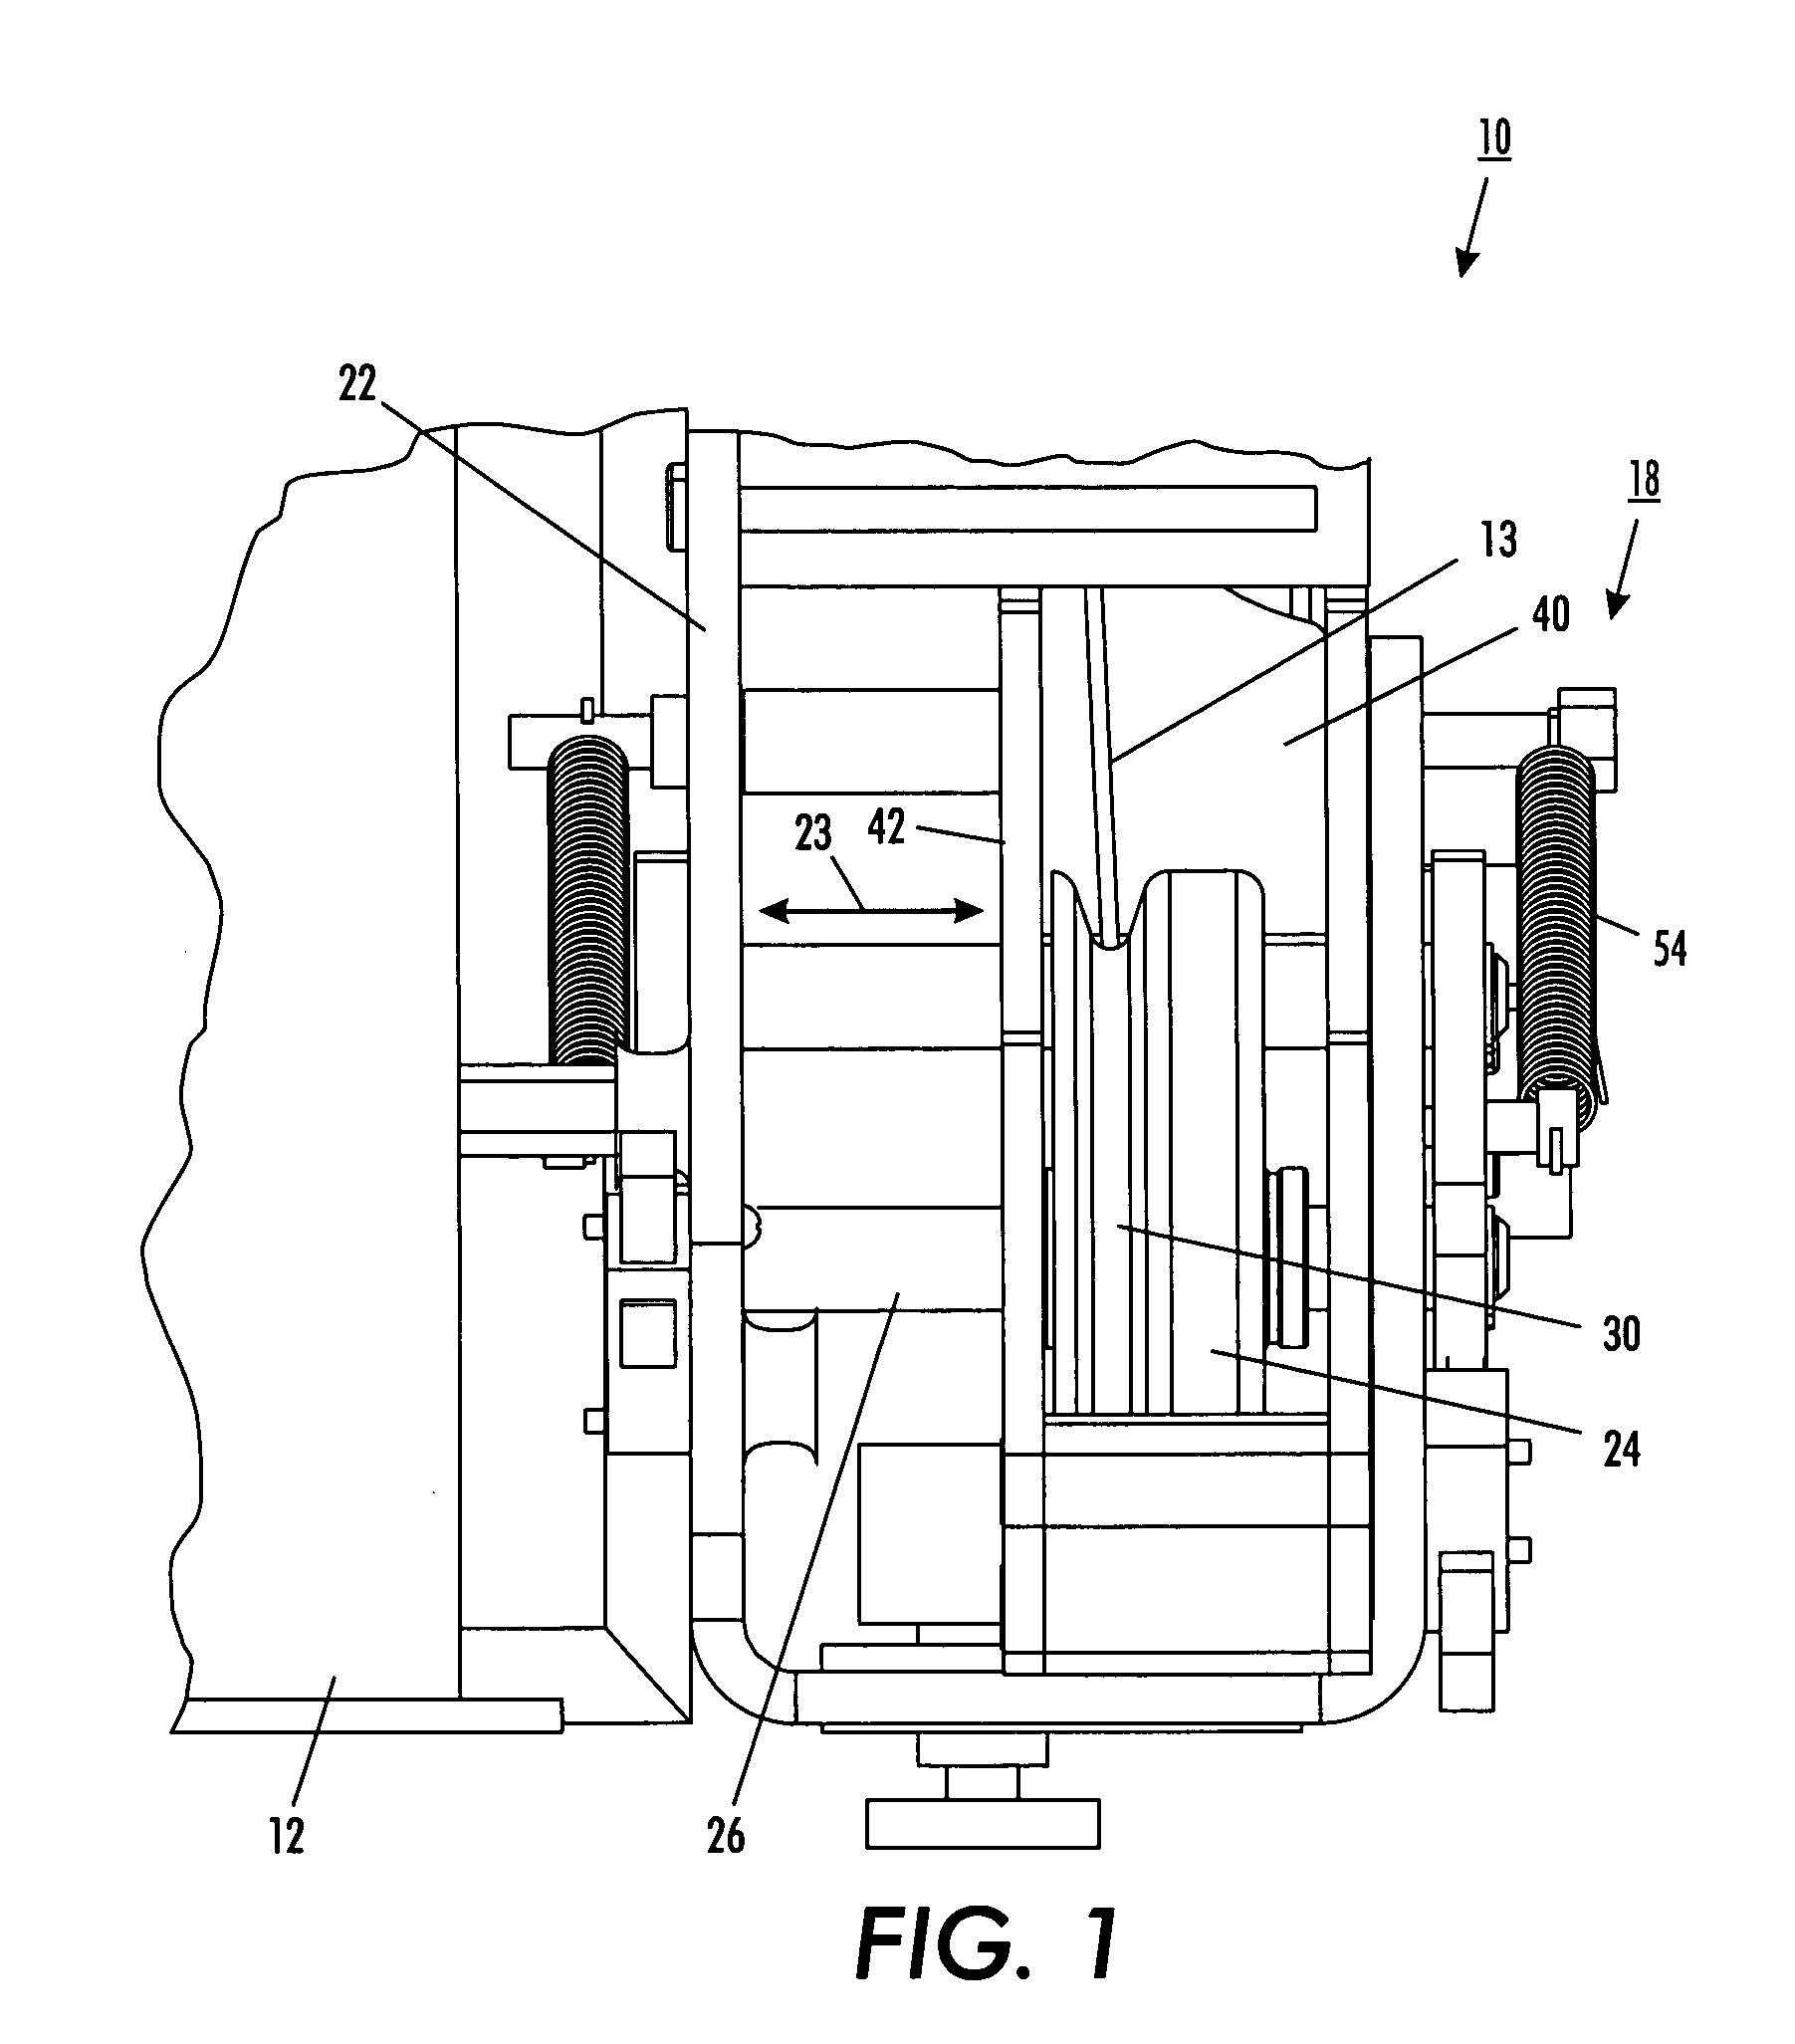 Cable slack and guide monitoring apparatus and method for a lift device